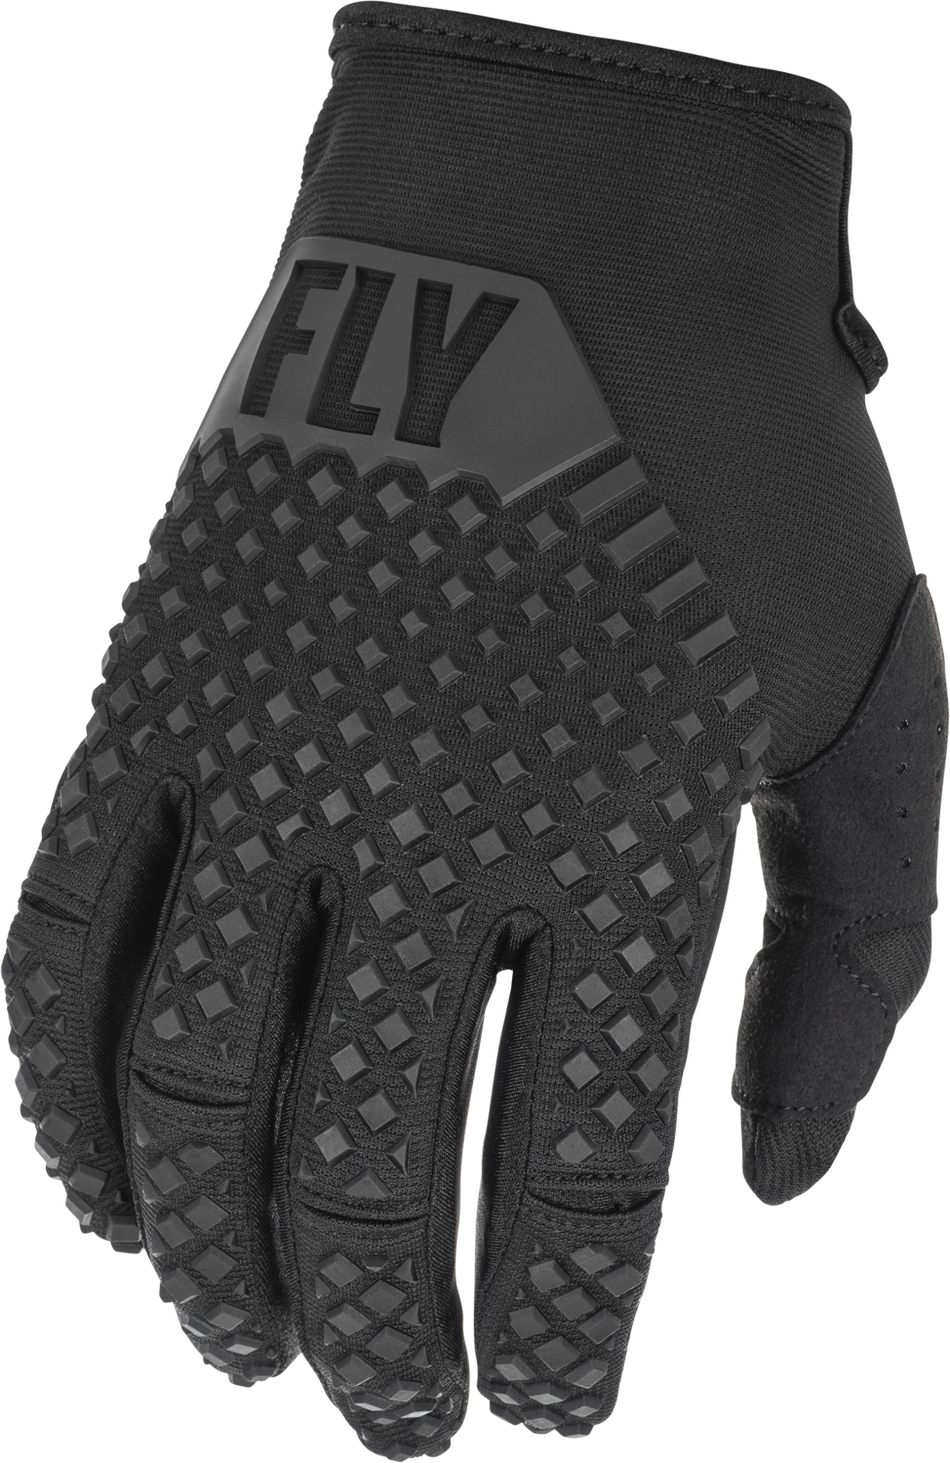 FLY RACING Youth Kinetic Gloves Black Ys 375-410YS